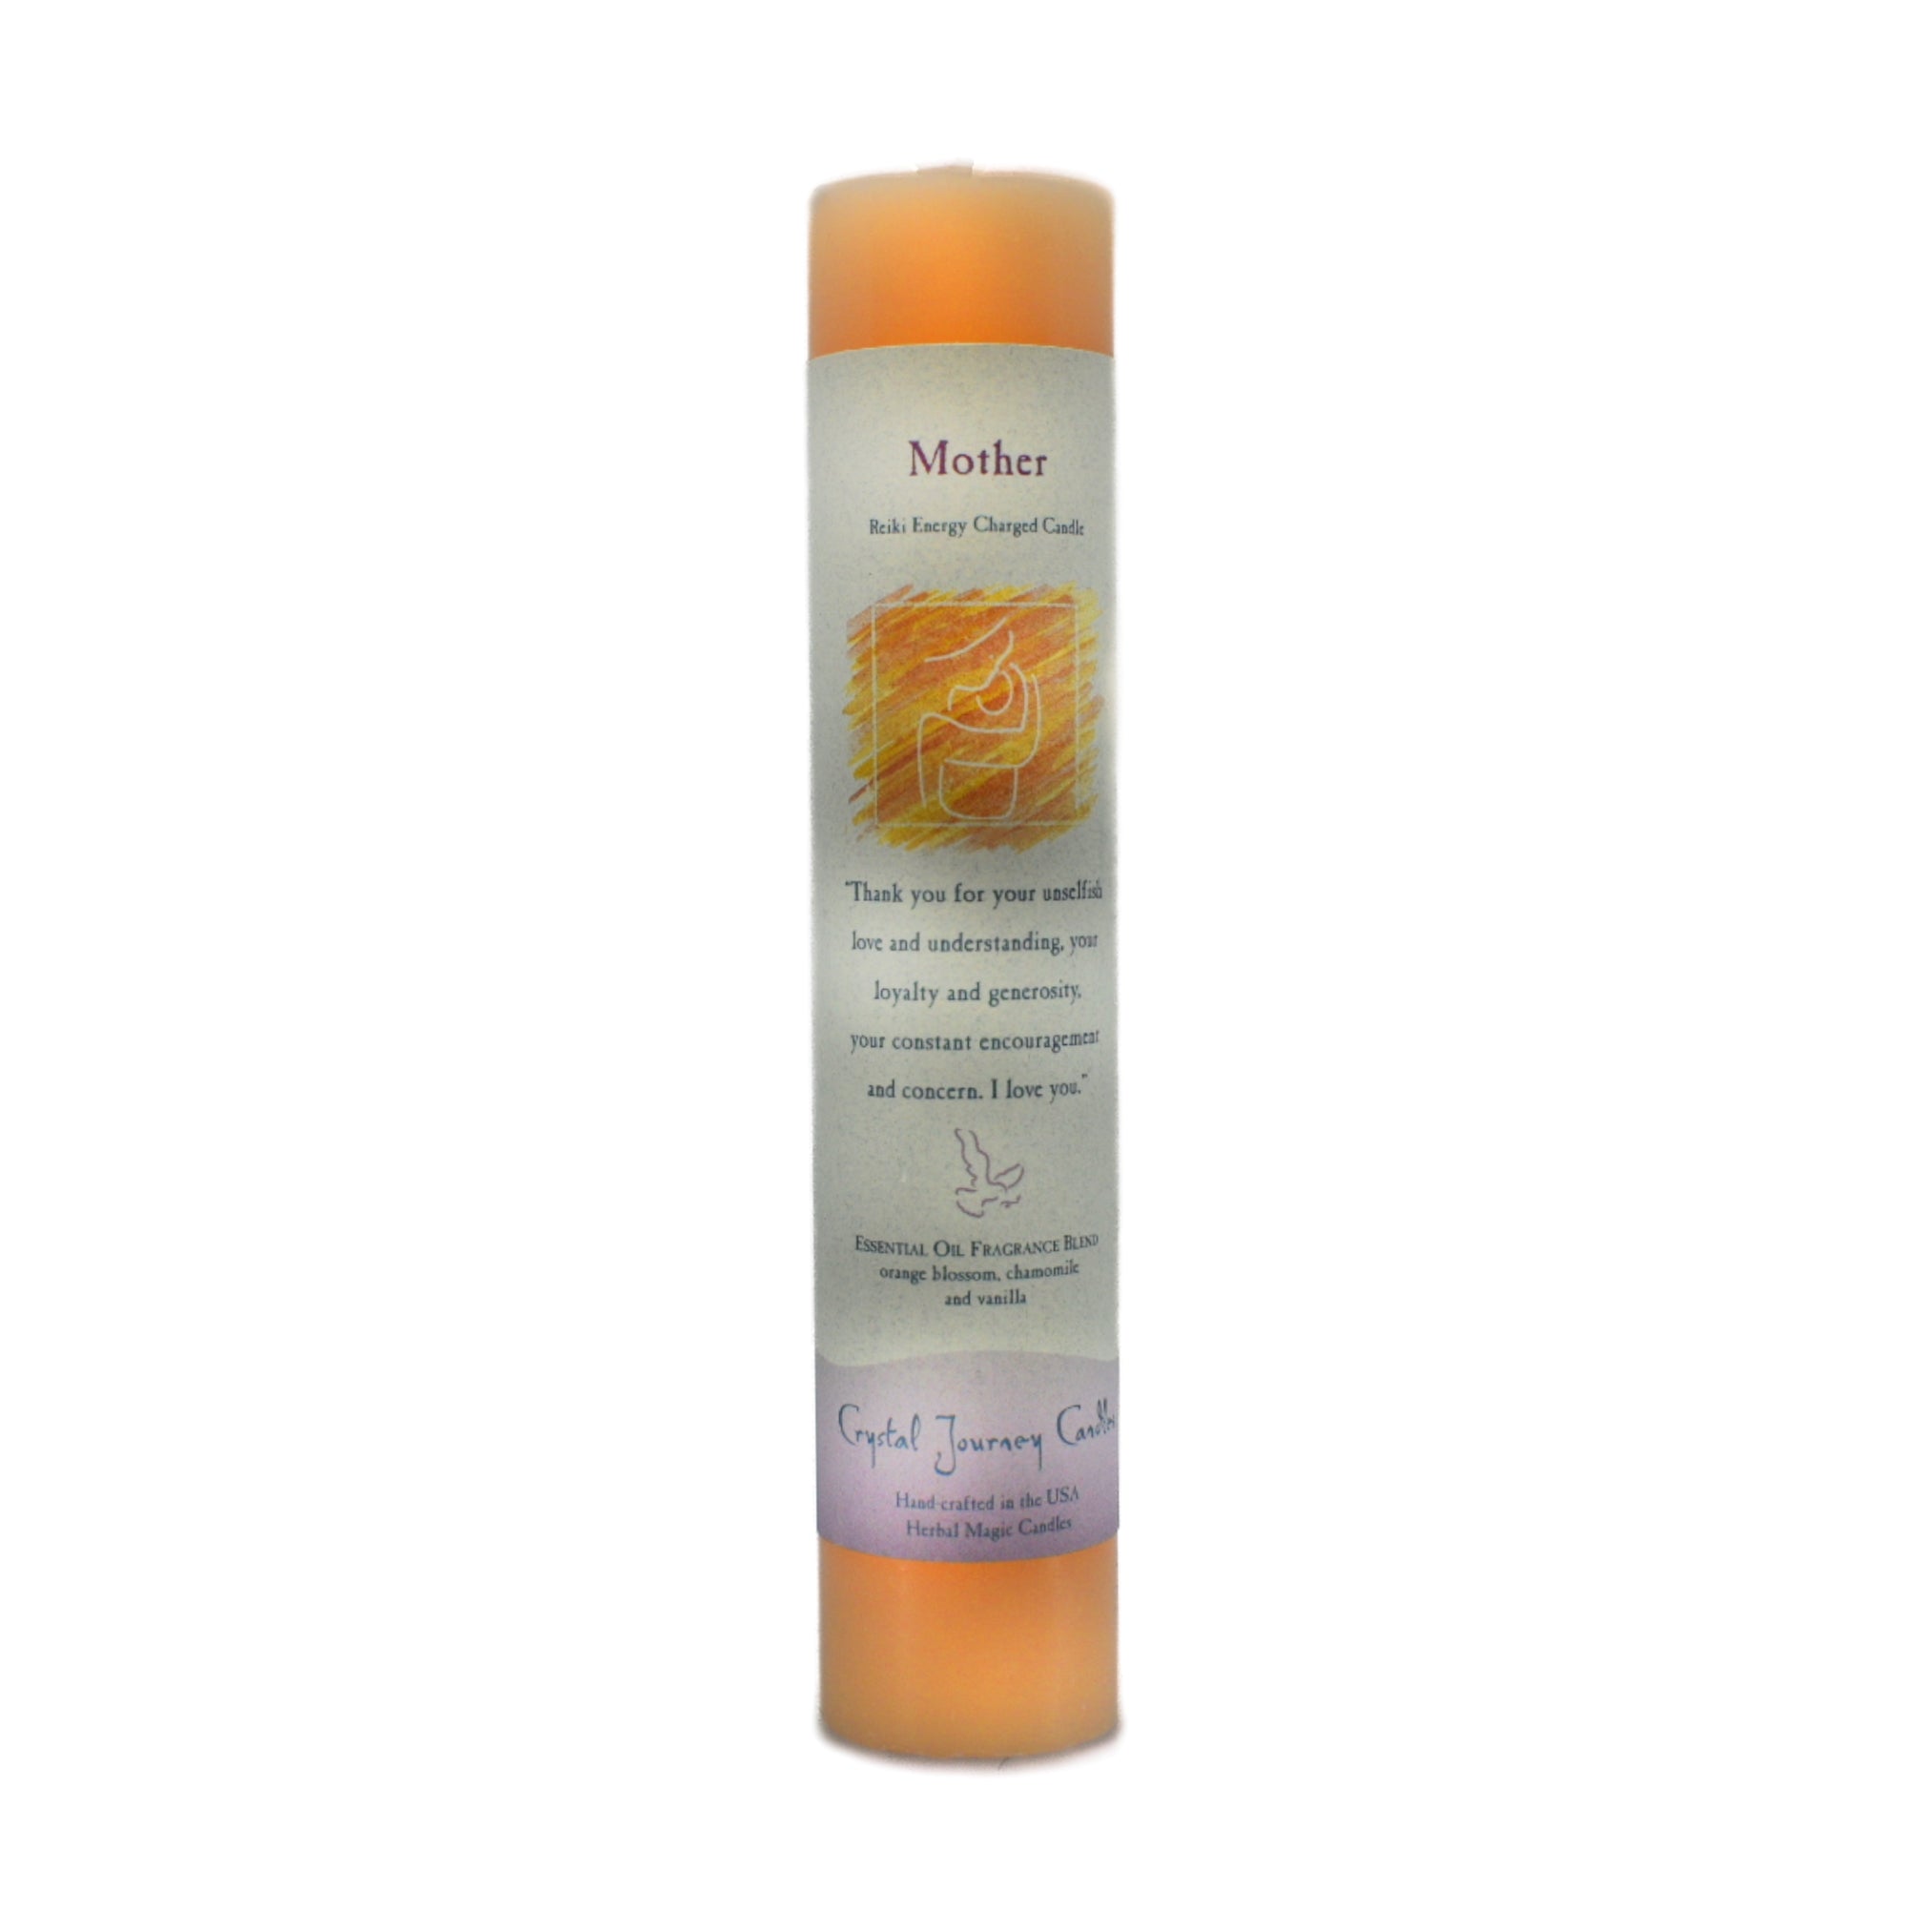 Mother Pillar Candle.  Use this candle to guide a mother and child's love in a positive light.  This candle is made in New England.  It is scented with essential oils of blossom, chamomile and vanilla.  